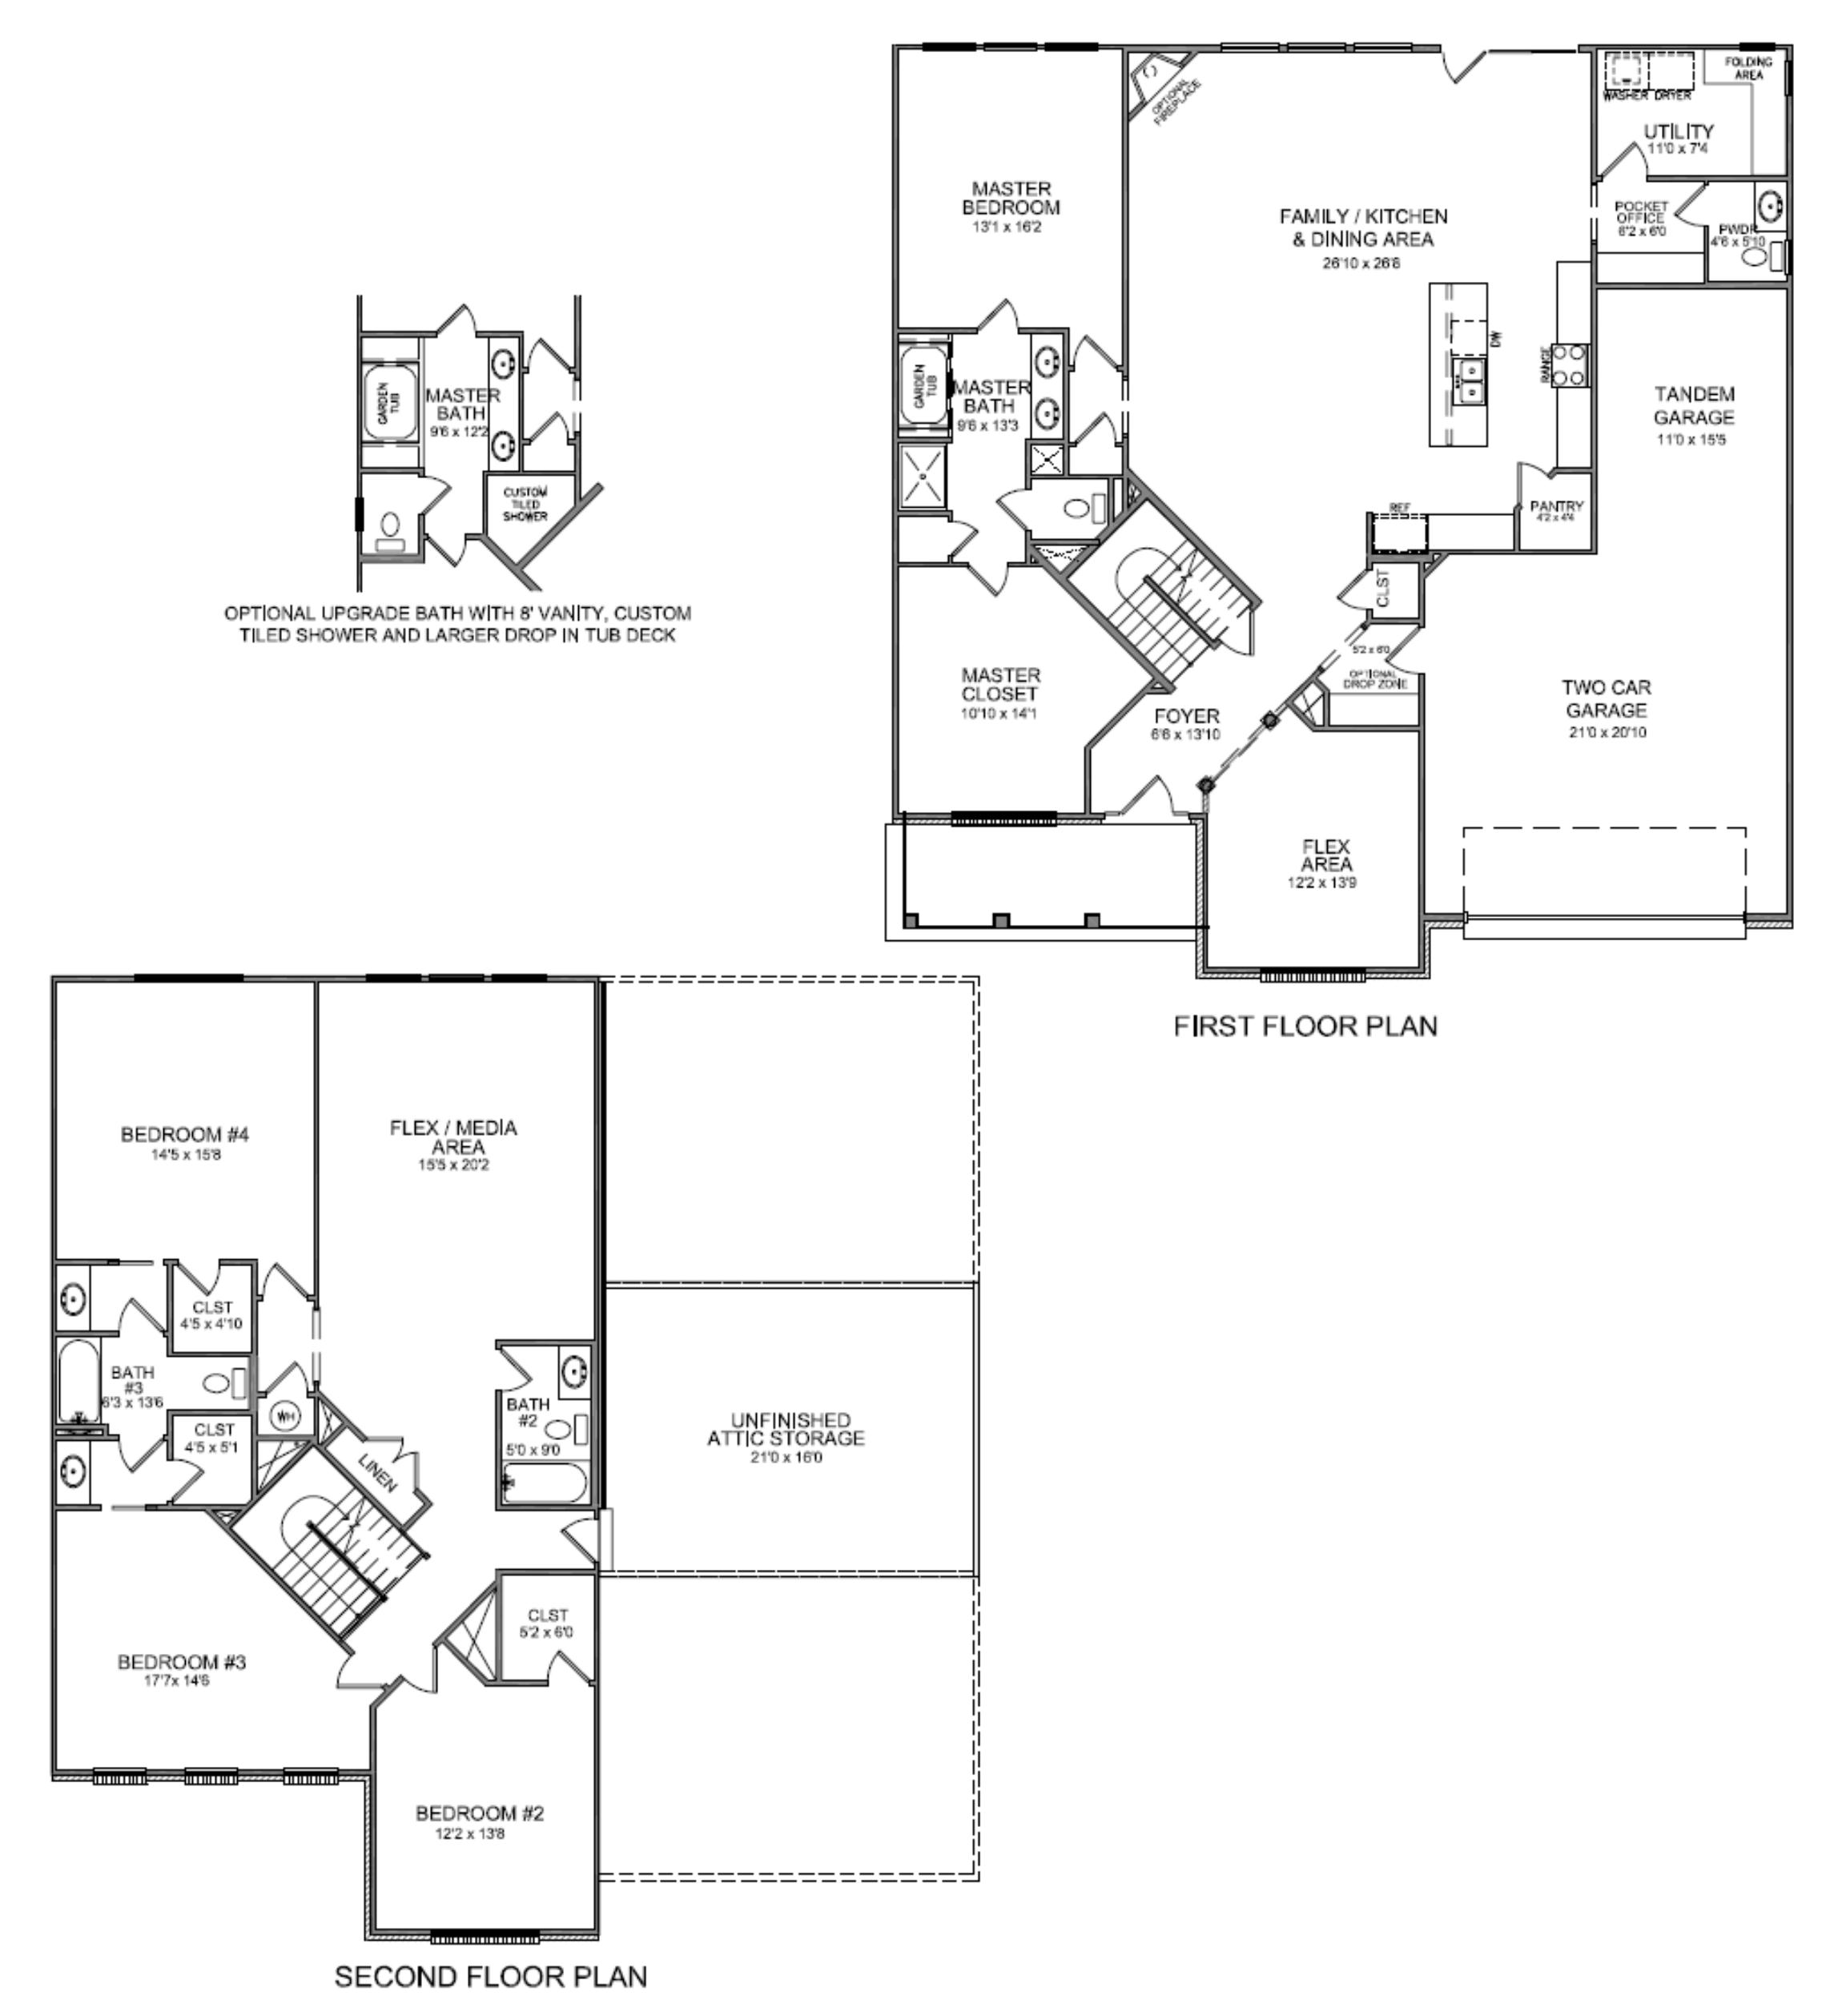 Master Bedroom Plans With Bath And Walk In Closet New House Design